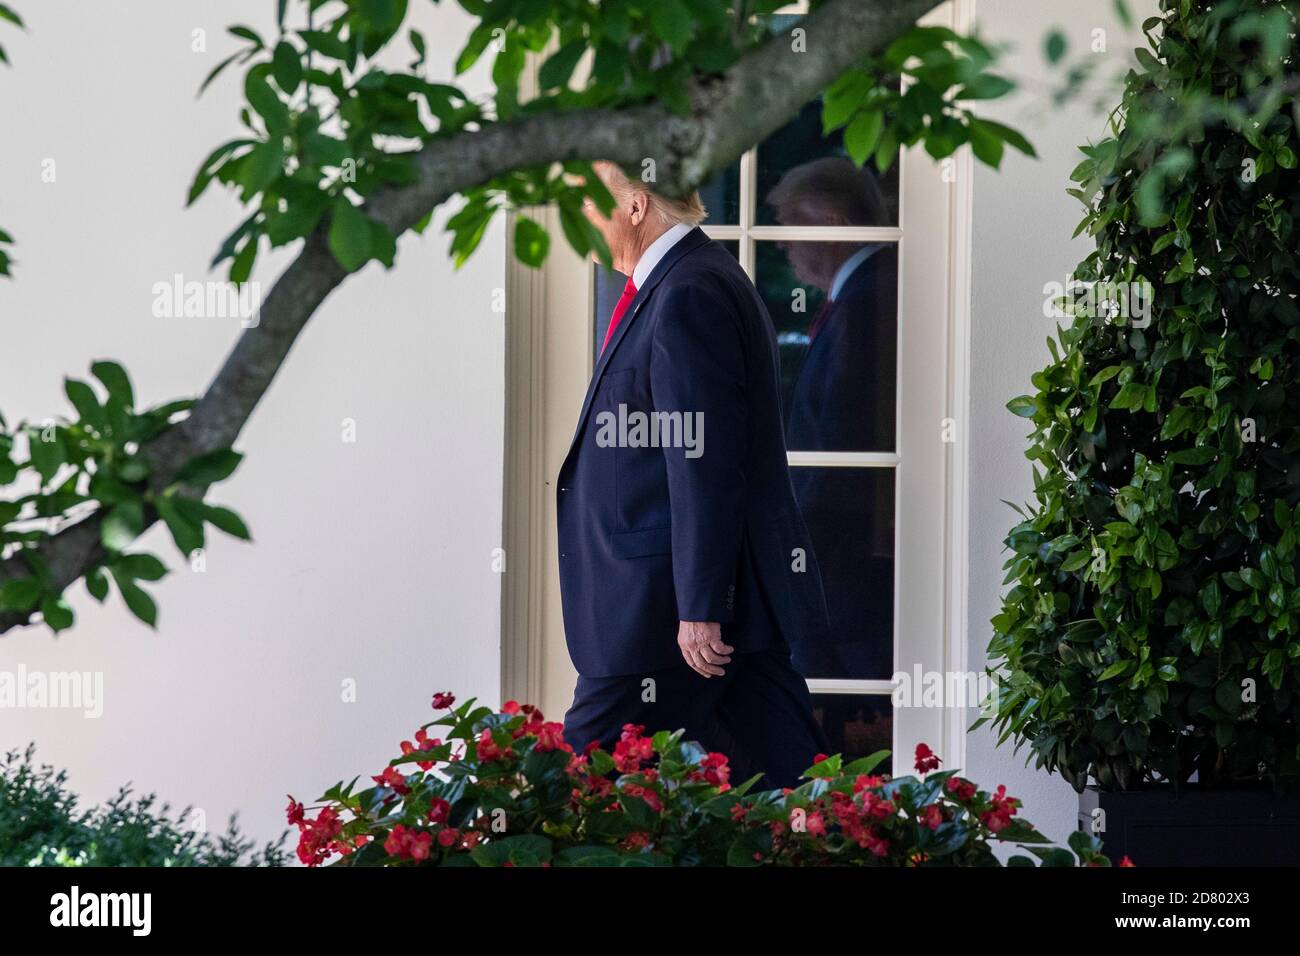 U.S. President Donald Trump exits the Oval Office before speaking with reporters on the South Lawn prior to departing the White House aboard Marine One on June 26, 2019 in Washington,D.C.. Trump will travel to Japan to attend the G-20 Summit. Credit: Alex Edelman/The Photo Access Stock Photo